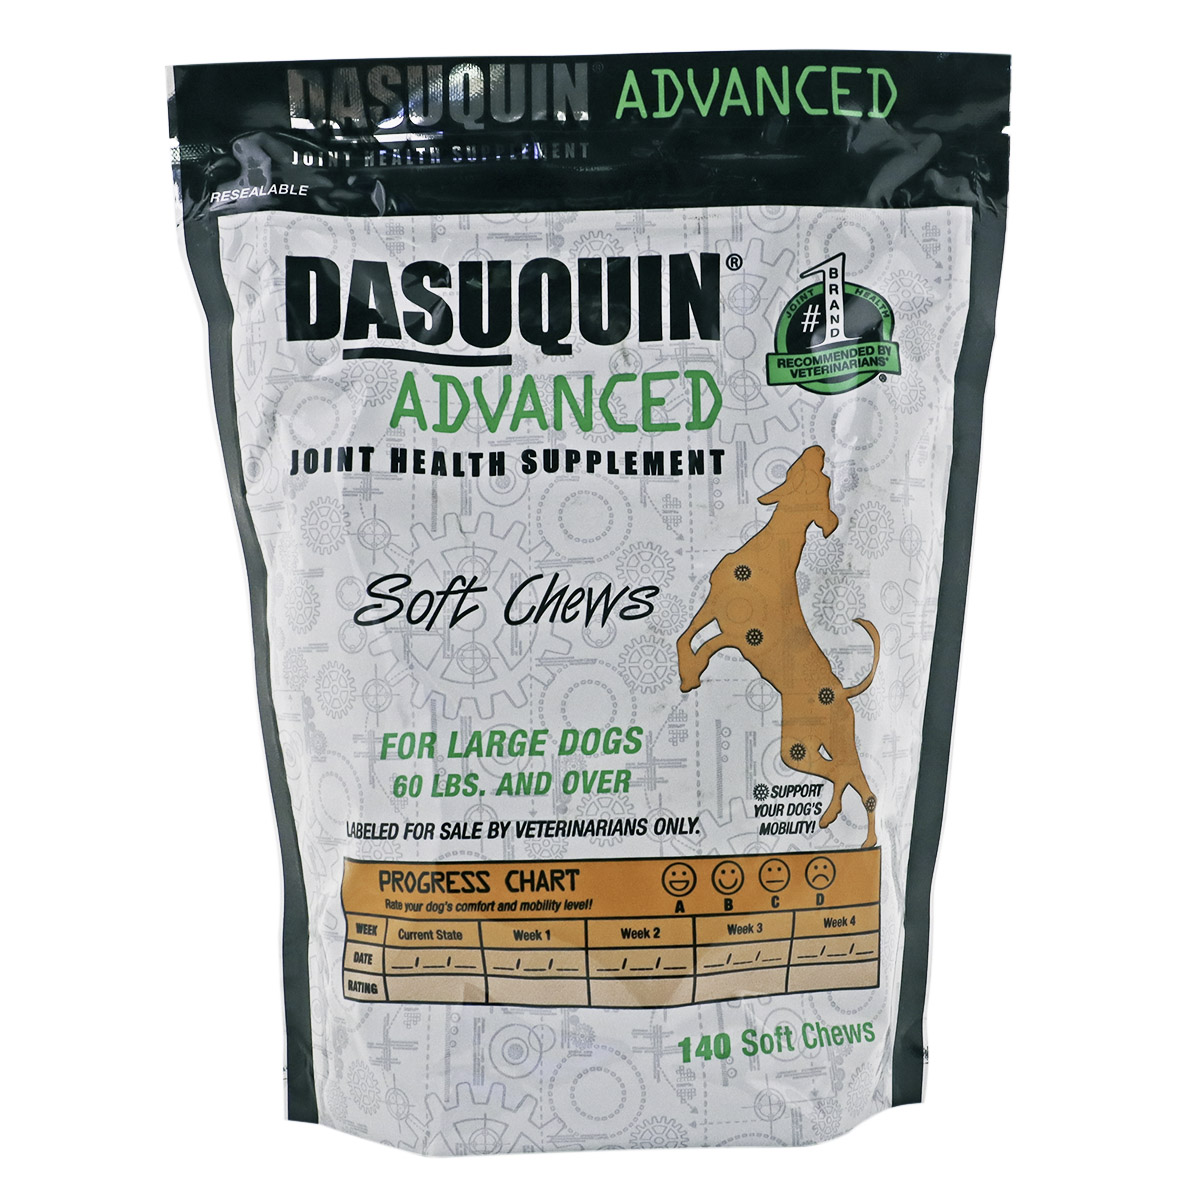 Northeast Veterinary Services. DASUQUIN ADVANCED SOFT CHEWS for LARGE